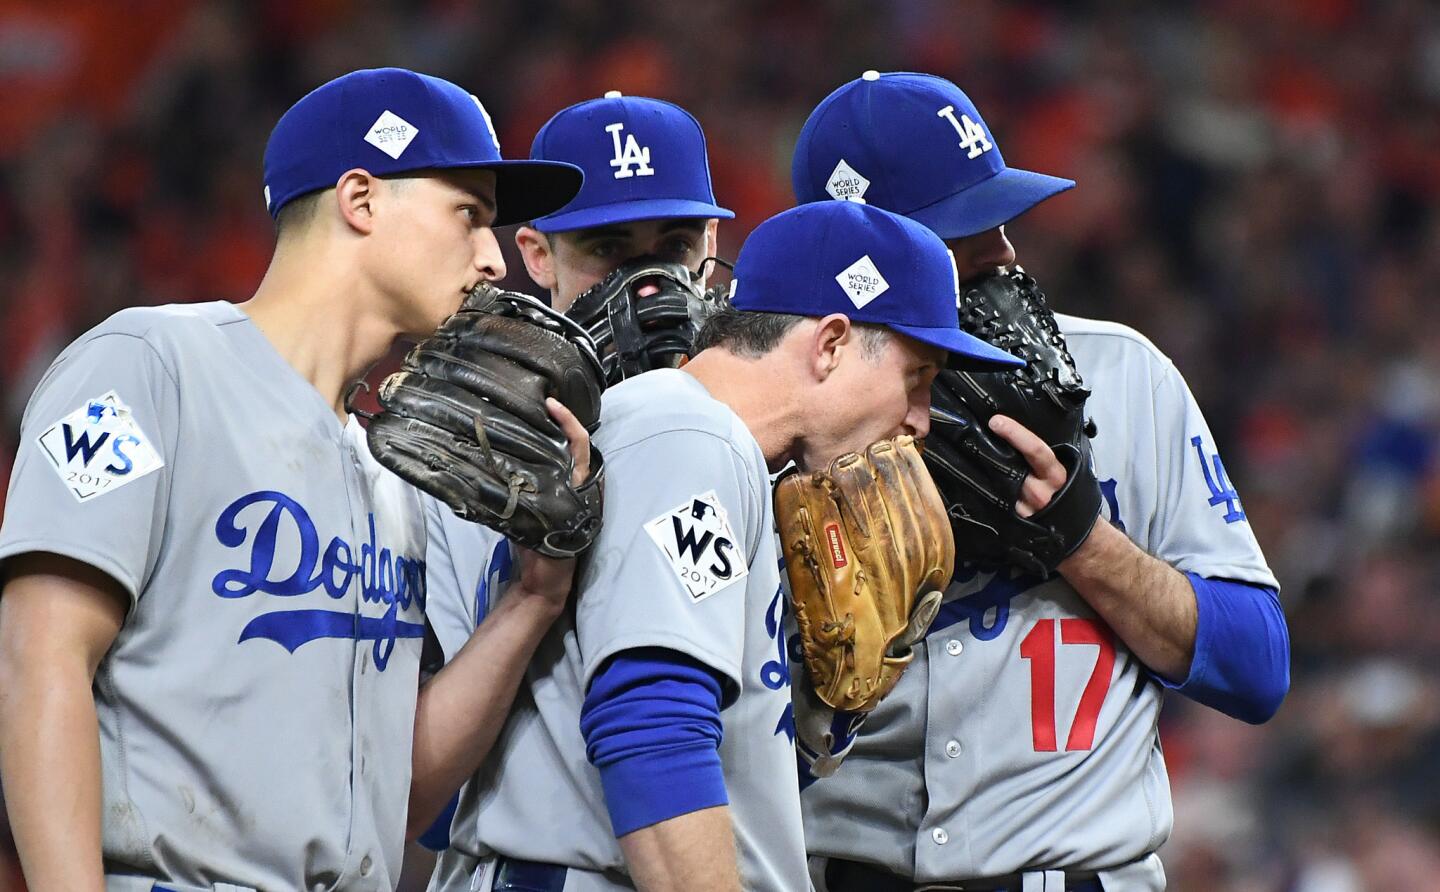 Dodgers' from left, Corey Seager, Cody Bellinger, Chase Utley and Brandon Morrow meet on the mound in Game 3.